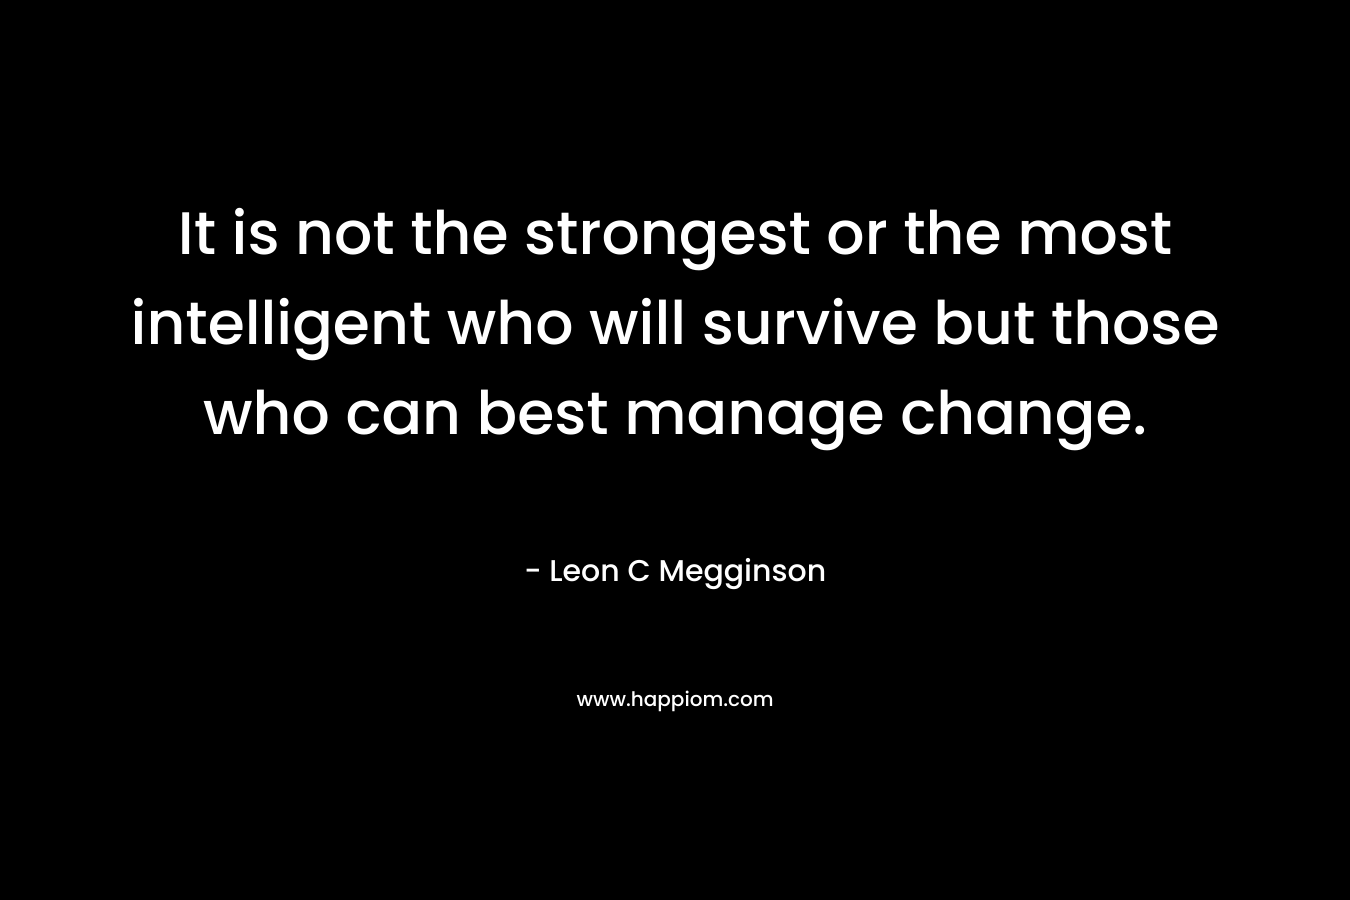 It is not the strongest or the most intelligent who will survive but those who can best manage change. – Leon C Megginson